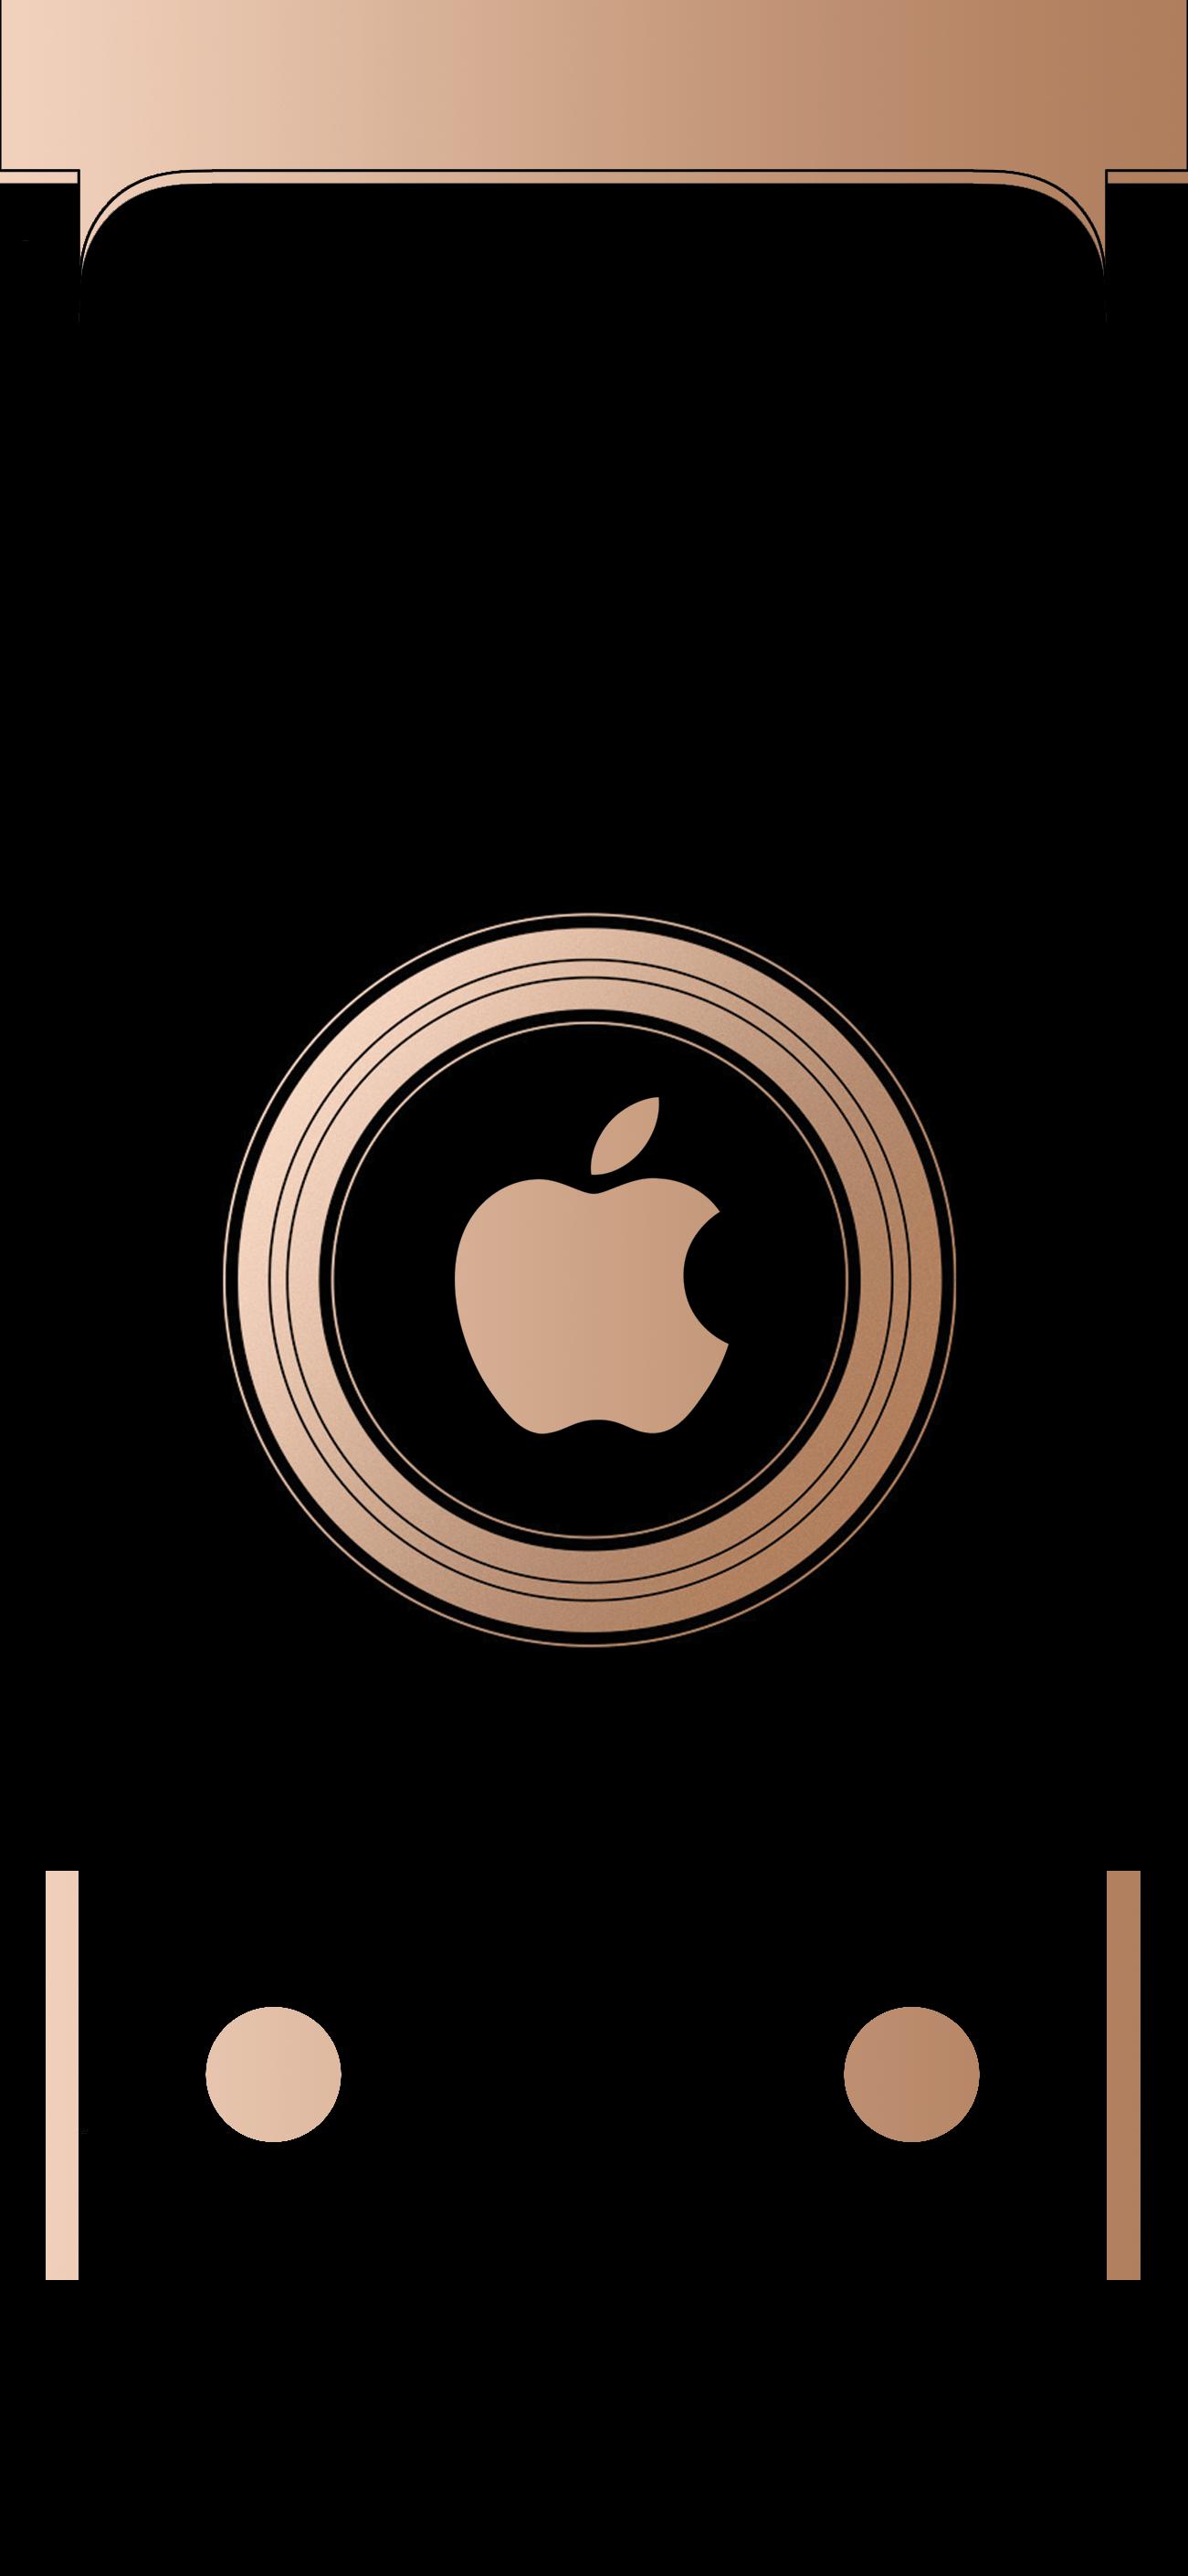 zooropalg september 12 iphone event iphone XAE2018 version 2 with logo